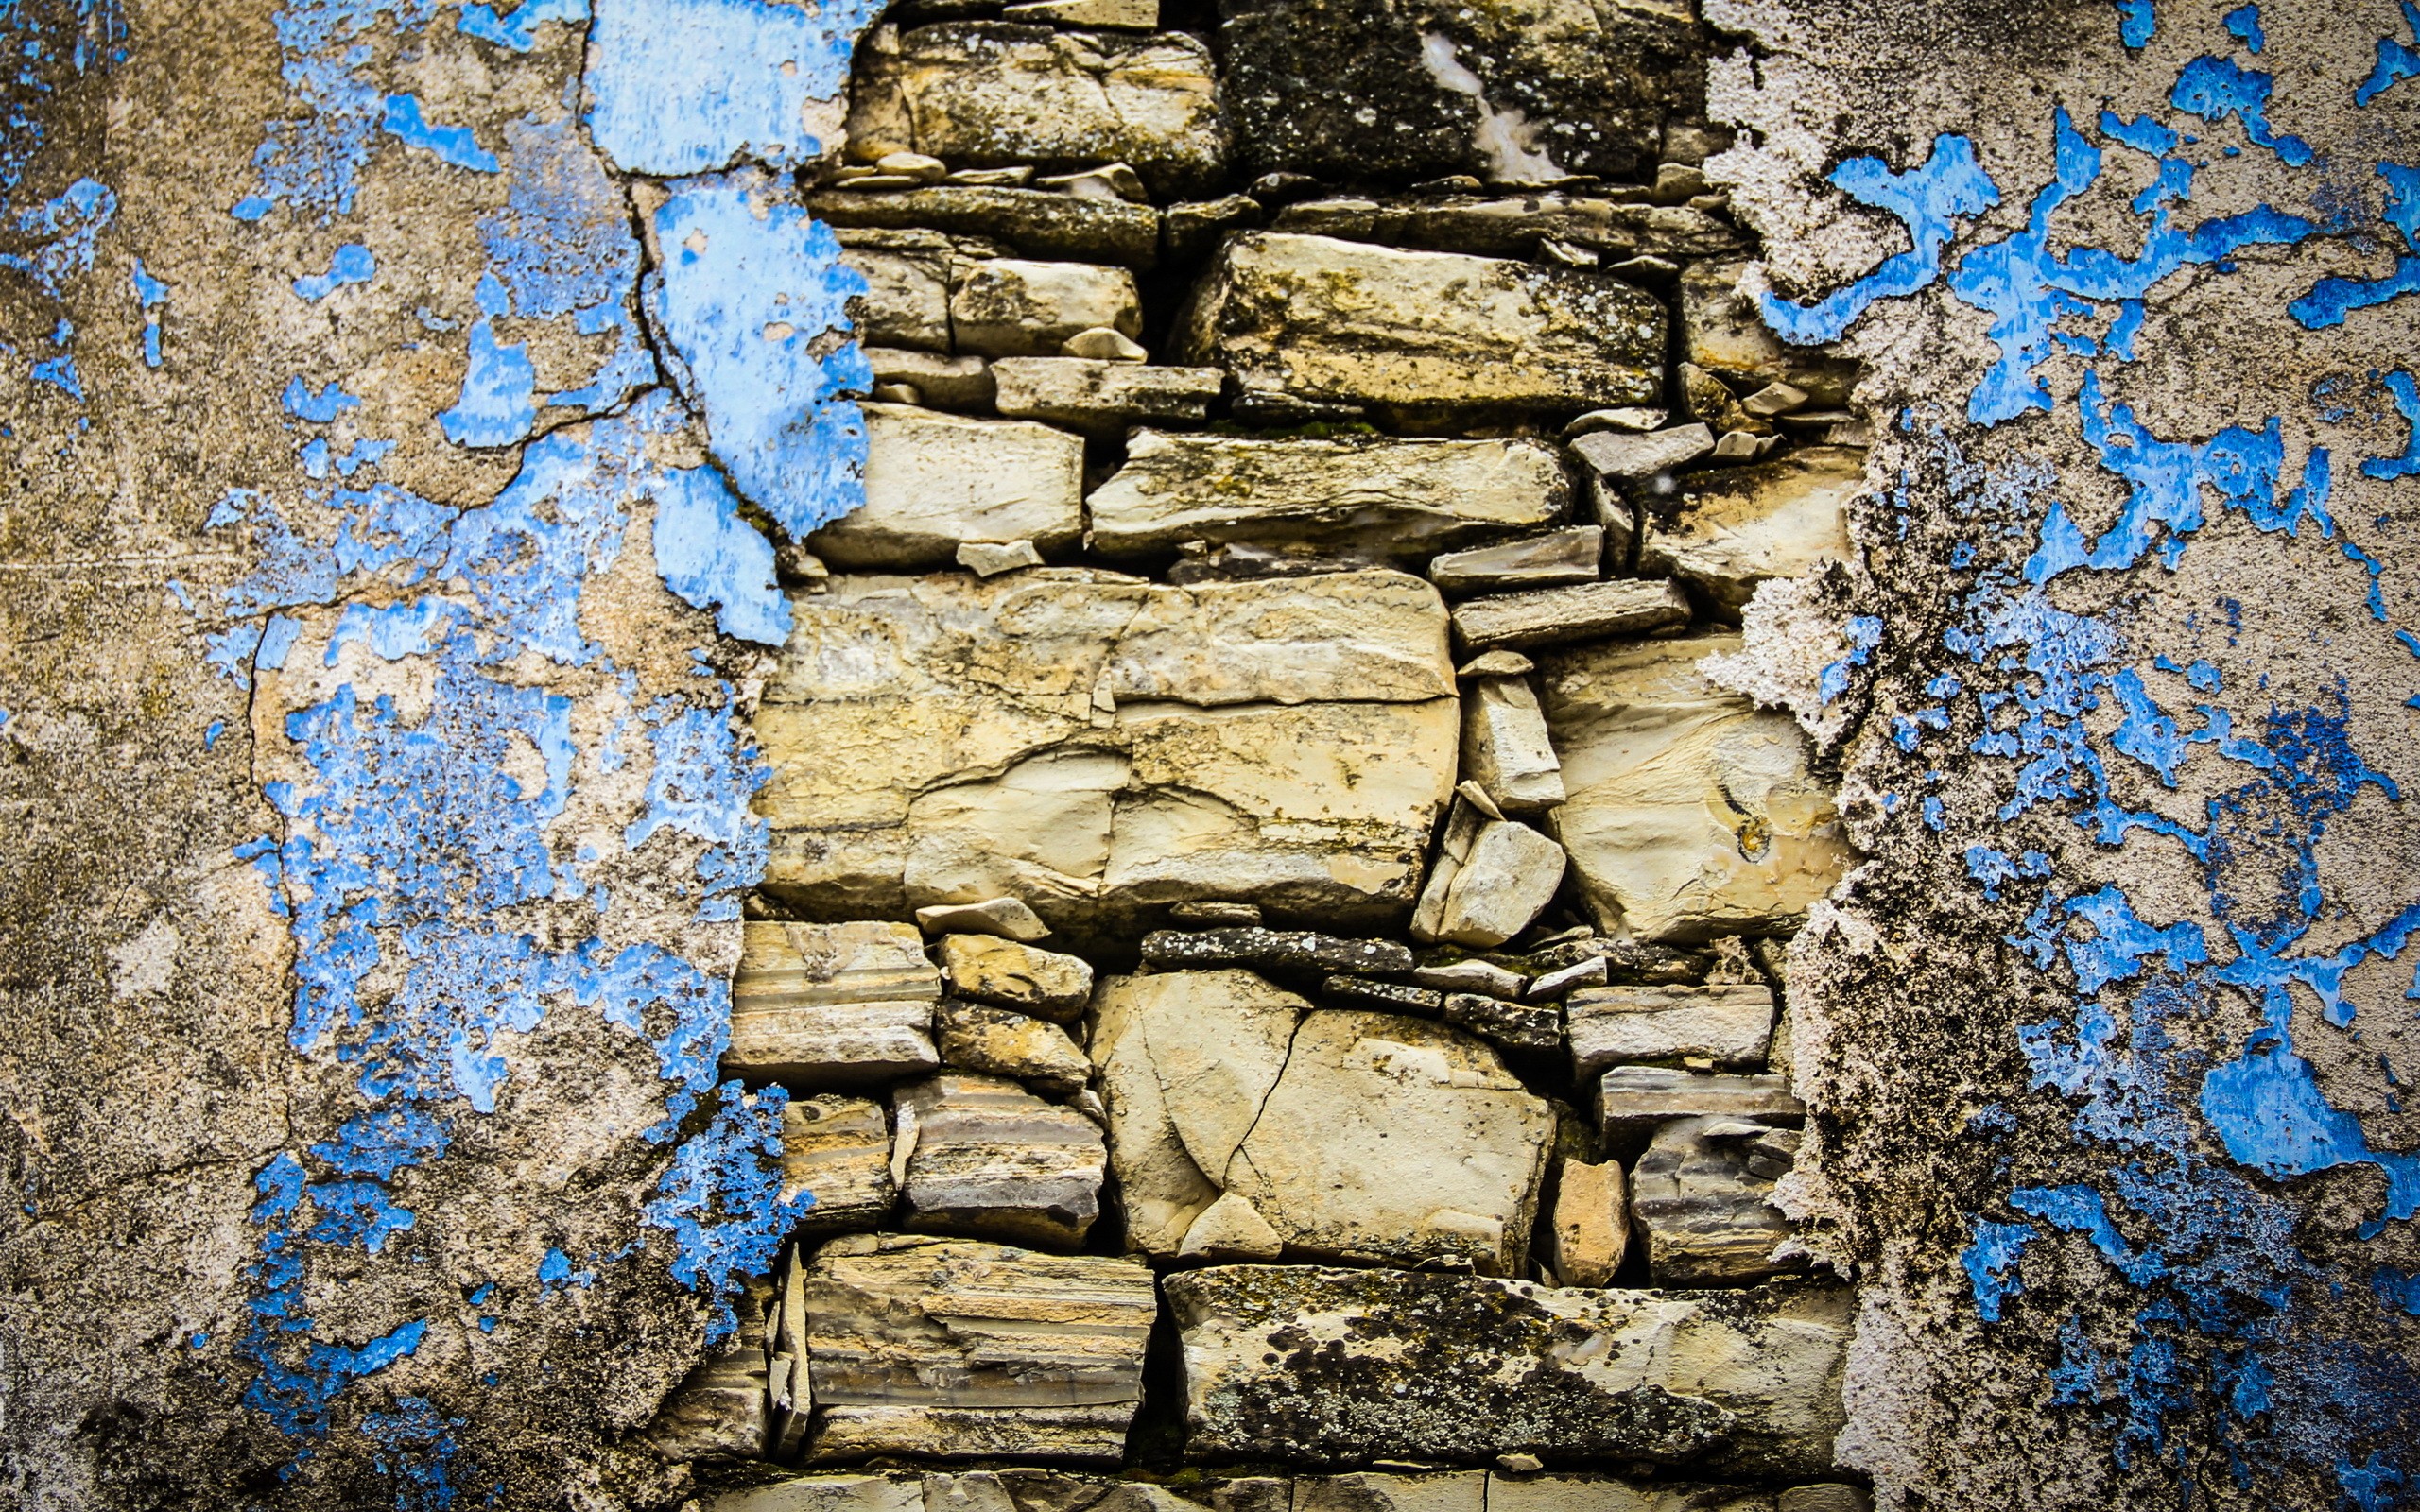 General 2560x1600 wall texture blue cracked stones rocks